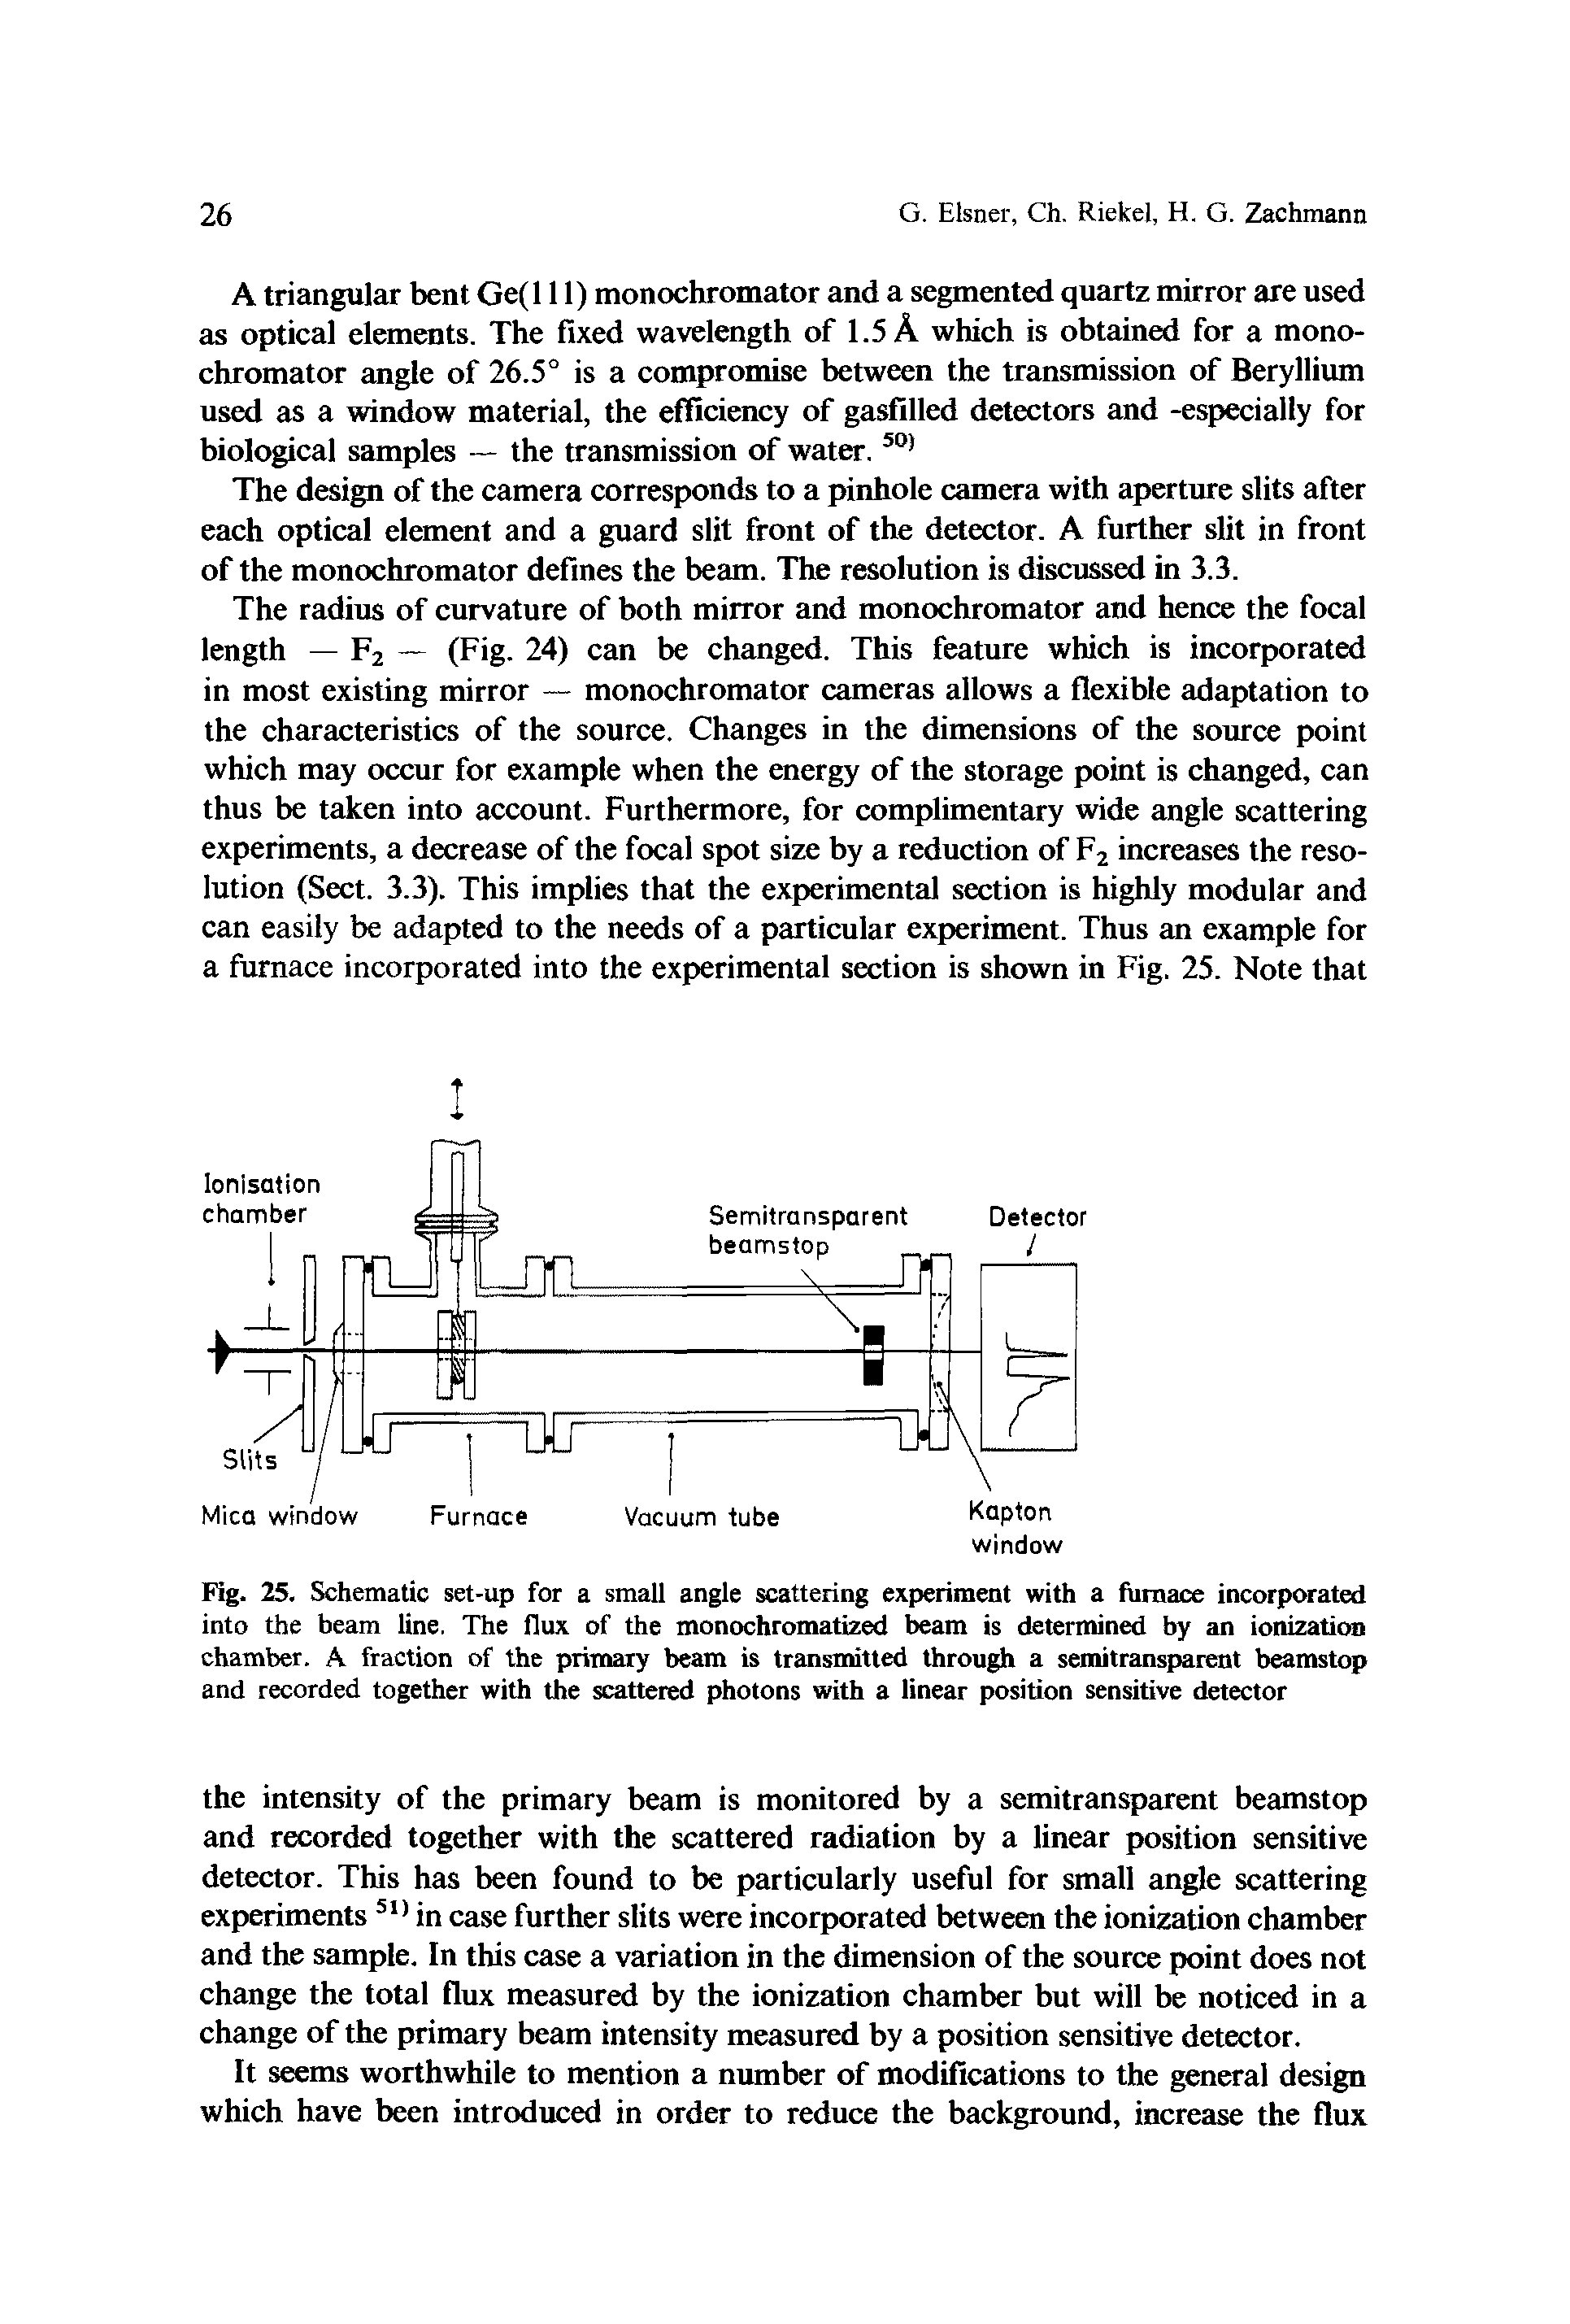 Fig. 25. Schematic set-up for a small angle scattering experiment with a furnace incorporated into the beam line. The flux of the monochromatized beam is determined by an ionization chamber. A fraction of the primary beam is transmitted through a semitransparent beamstop and recorded together with the scattered photons with a linear position sensitive detector...